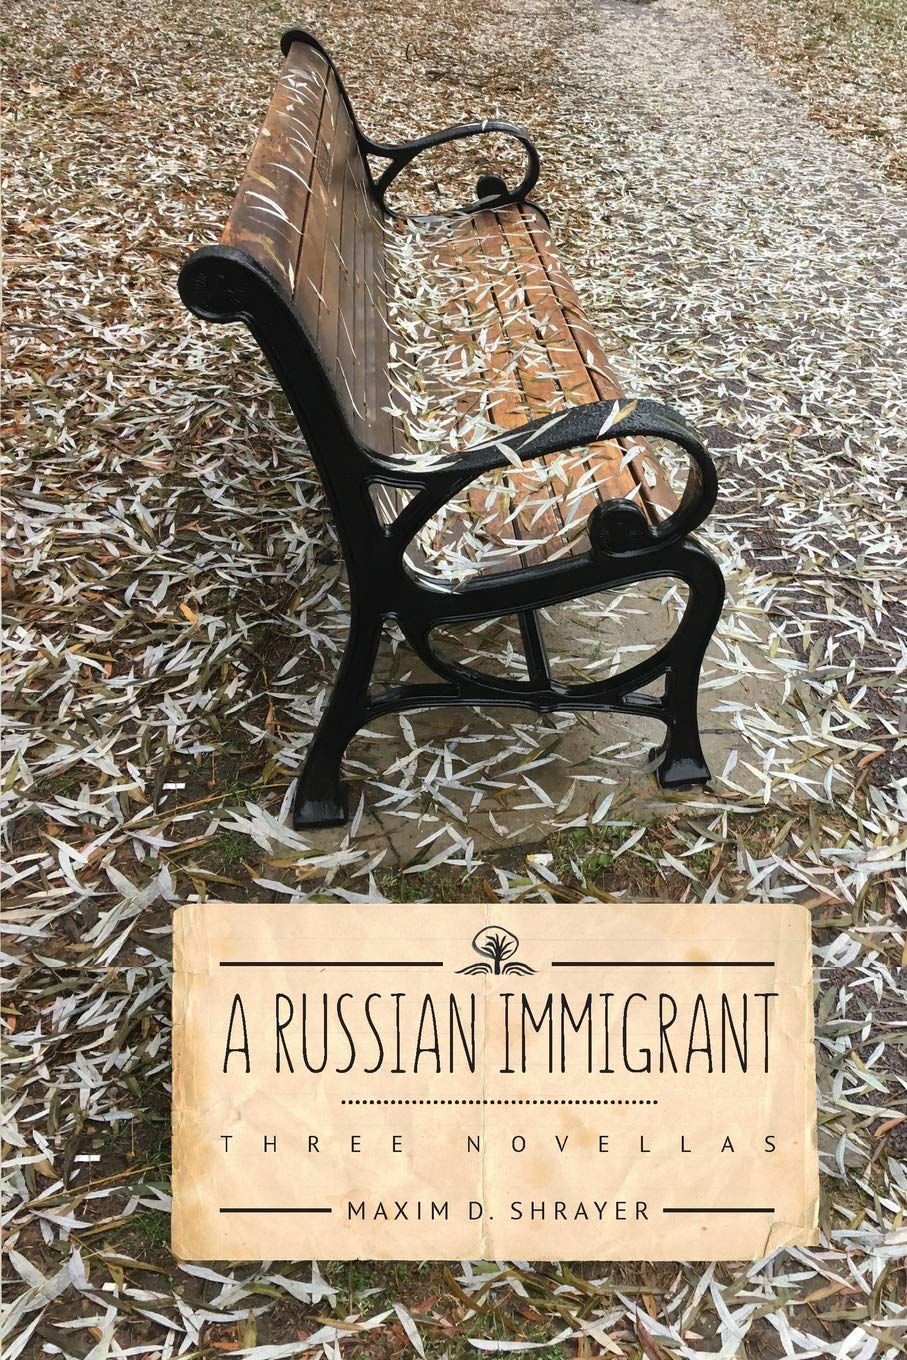 Acute Infection or Chronic Condition? On Maxim D. Shrayer’s “A Russian Immigrant: Three Novellas”